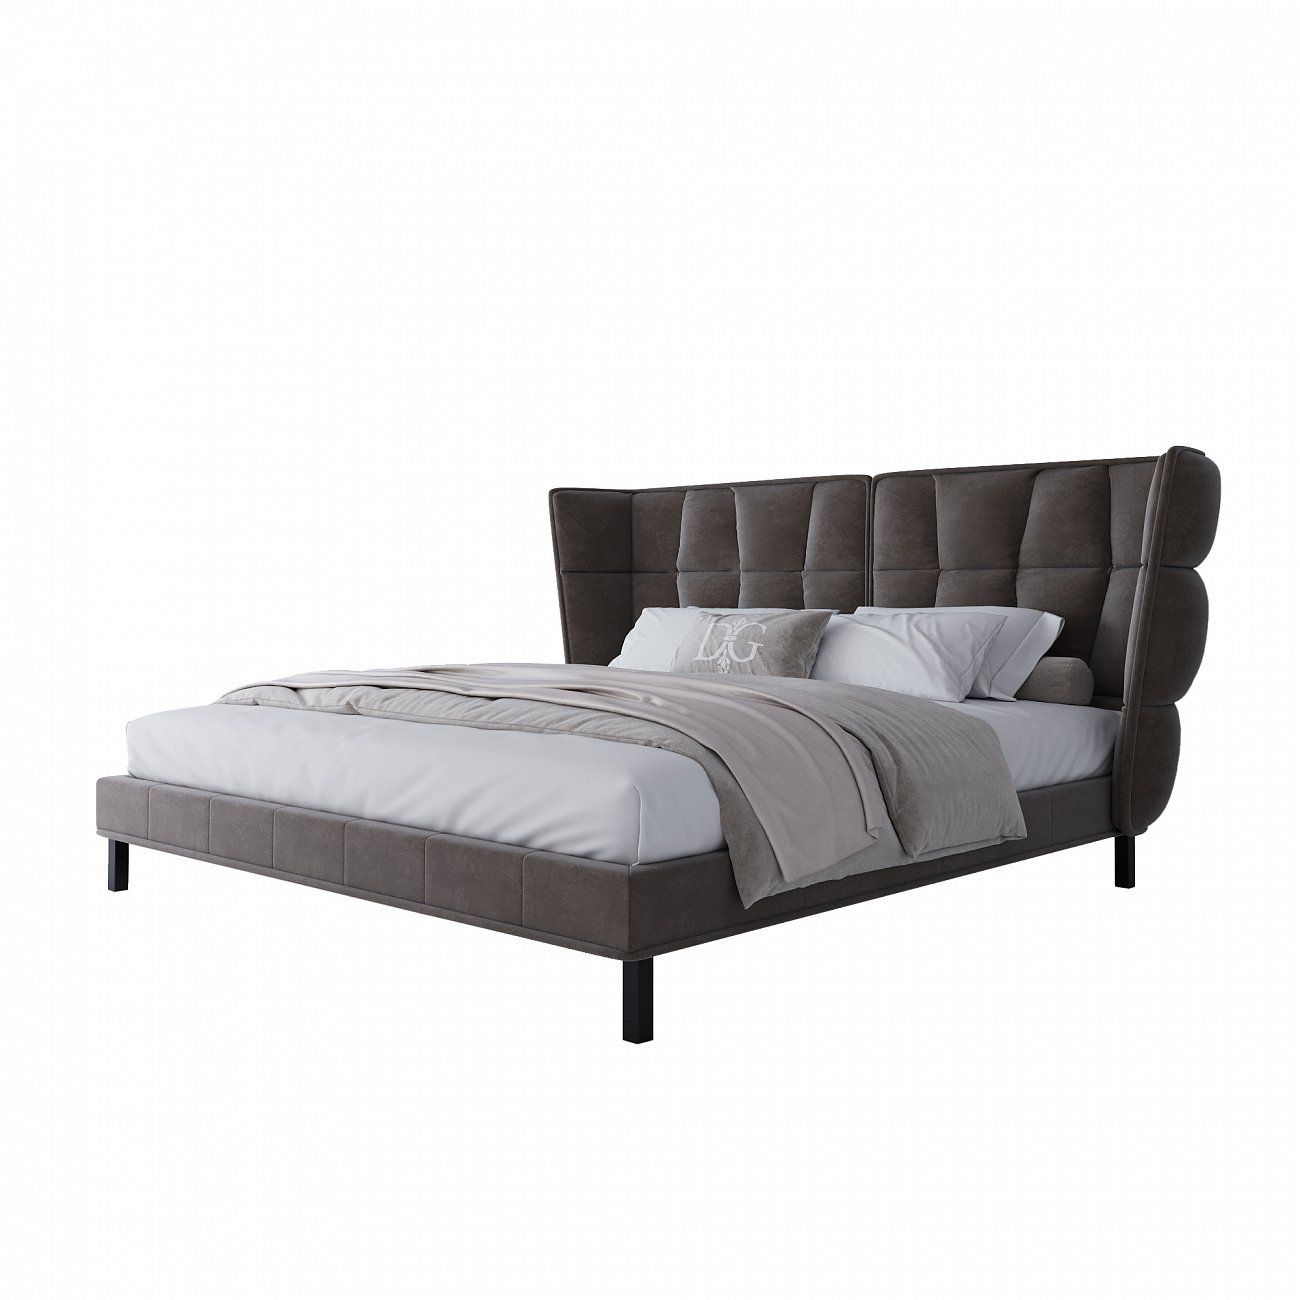 Double bed 200x200 grey Husk (box spring)